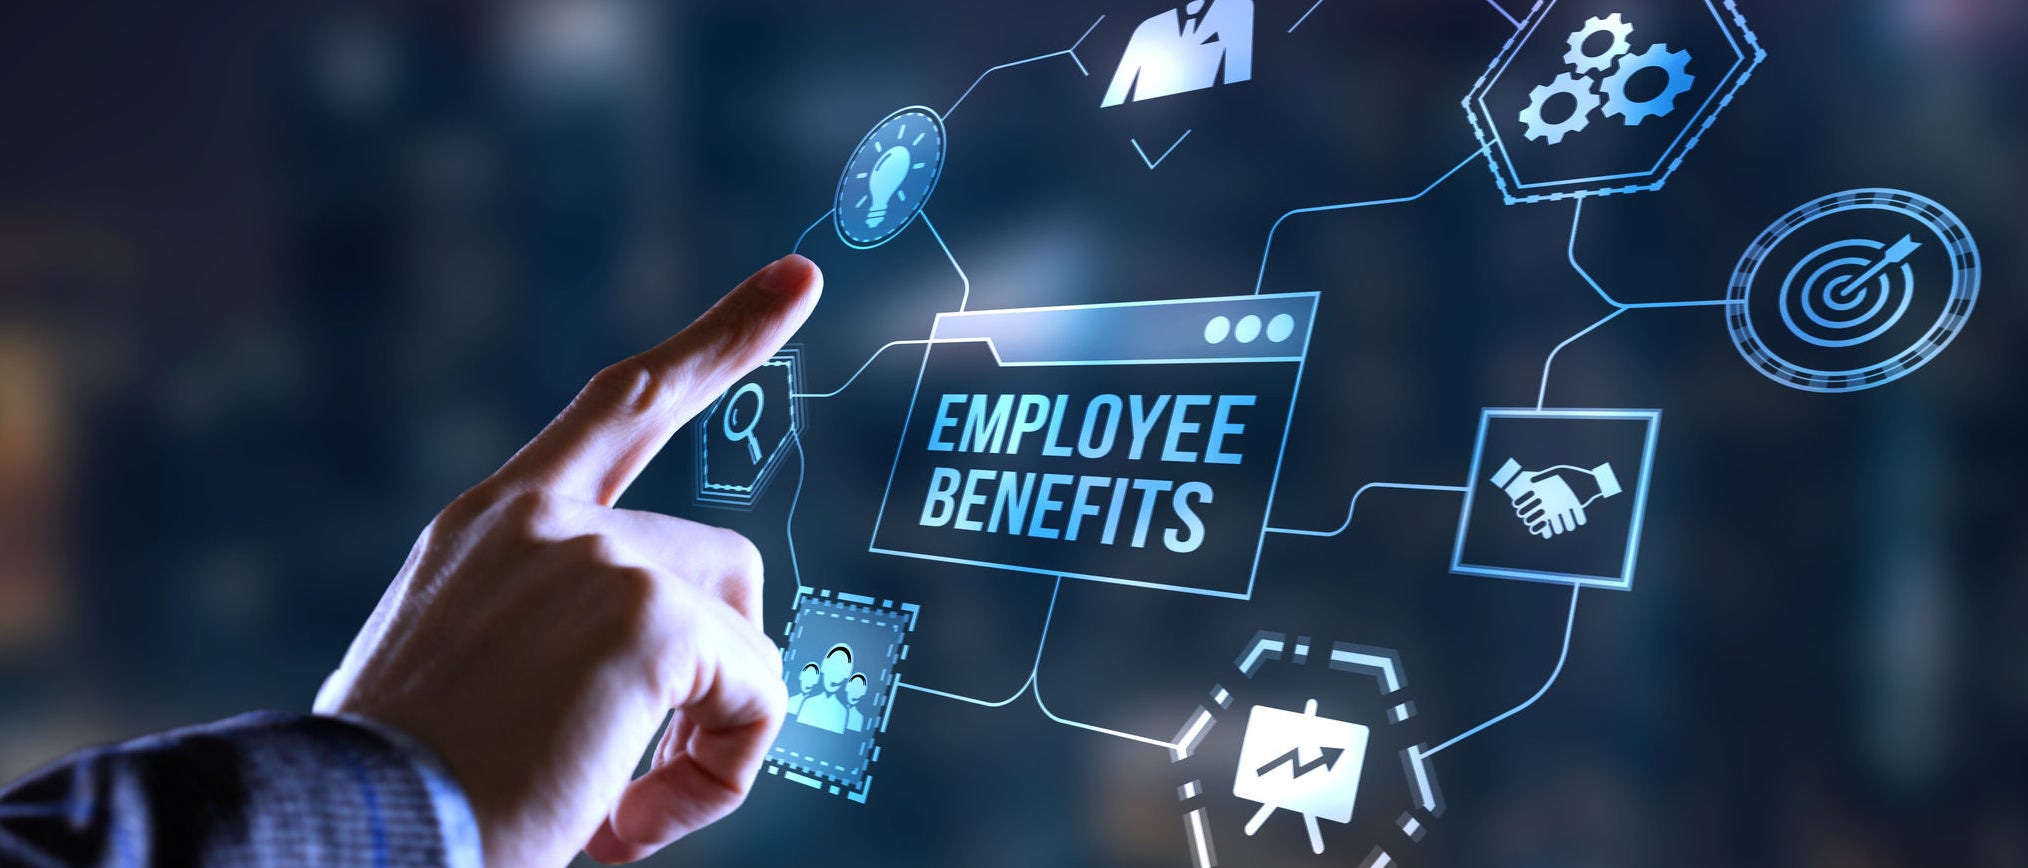 Internet, business, Technology and network concept. Shows the inscription: EMPLOYEE BENEFITS